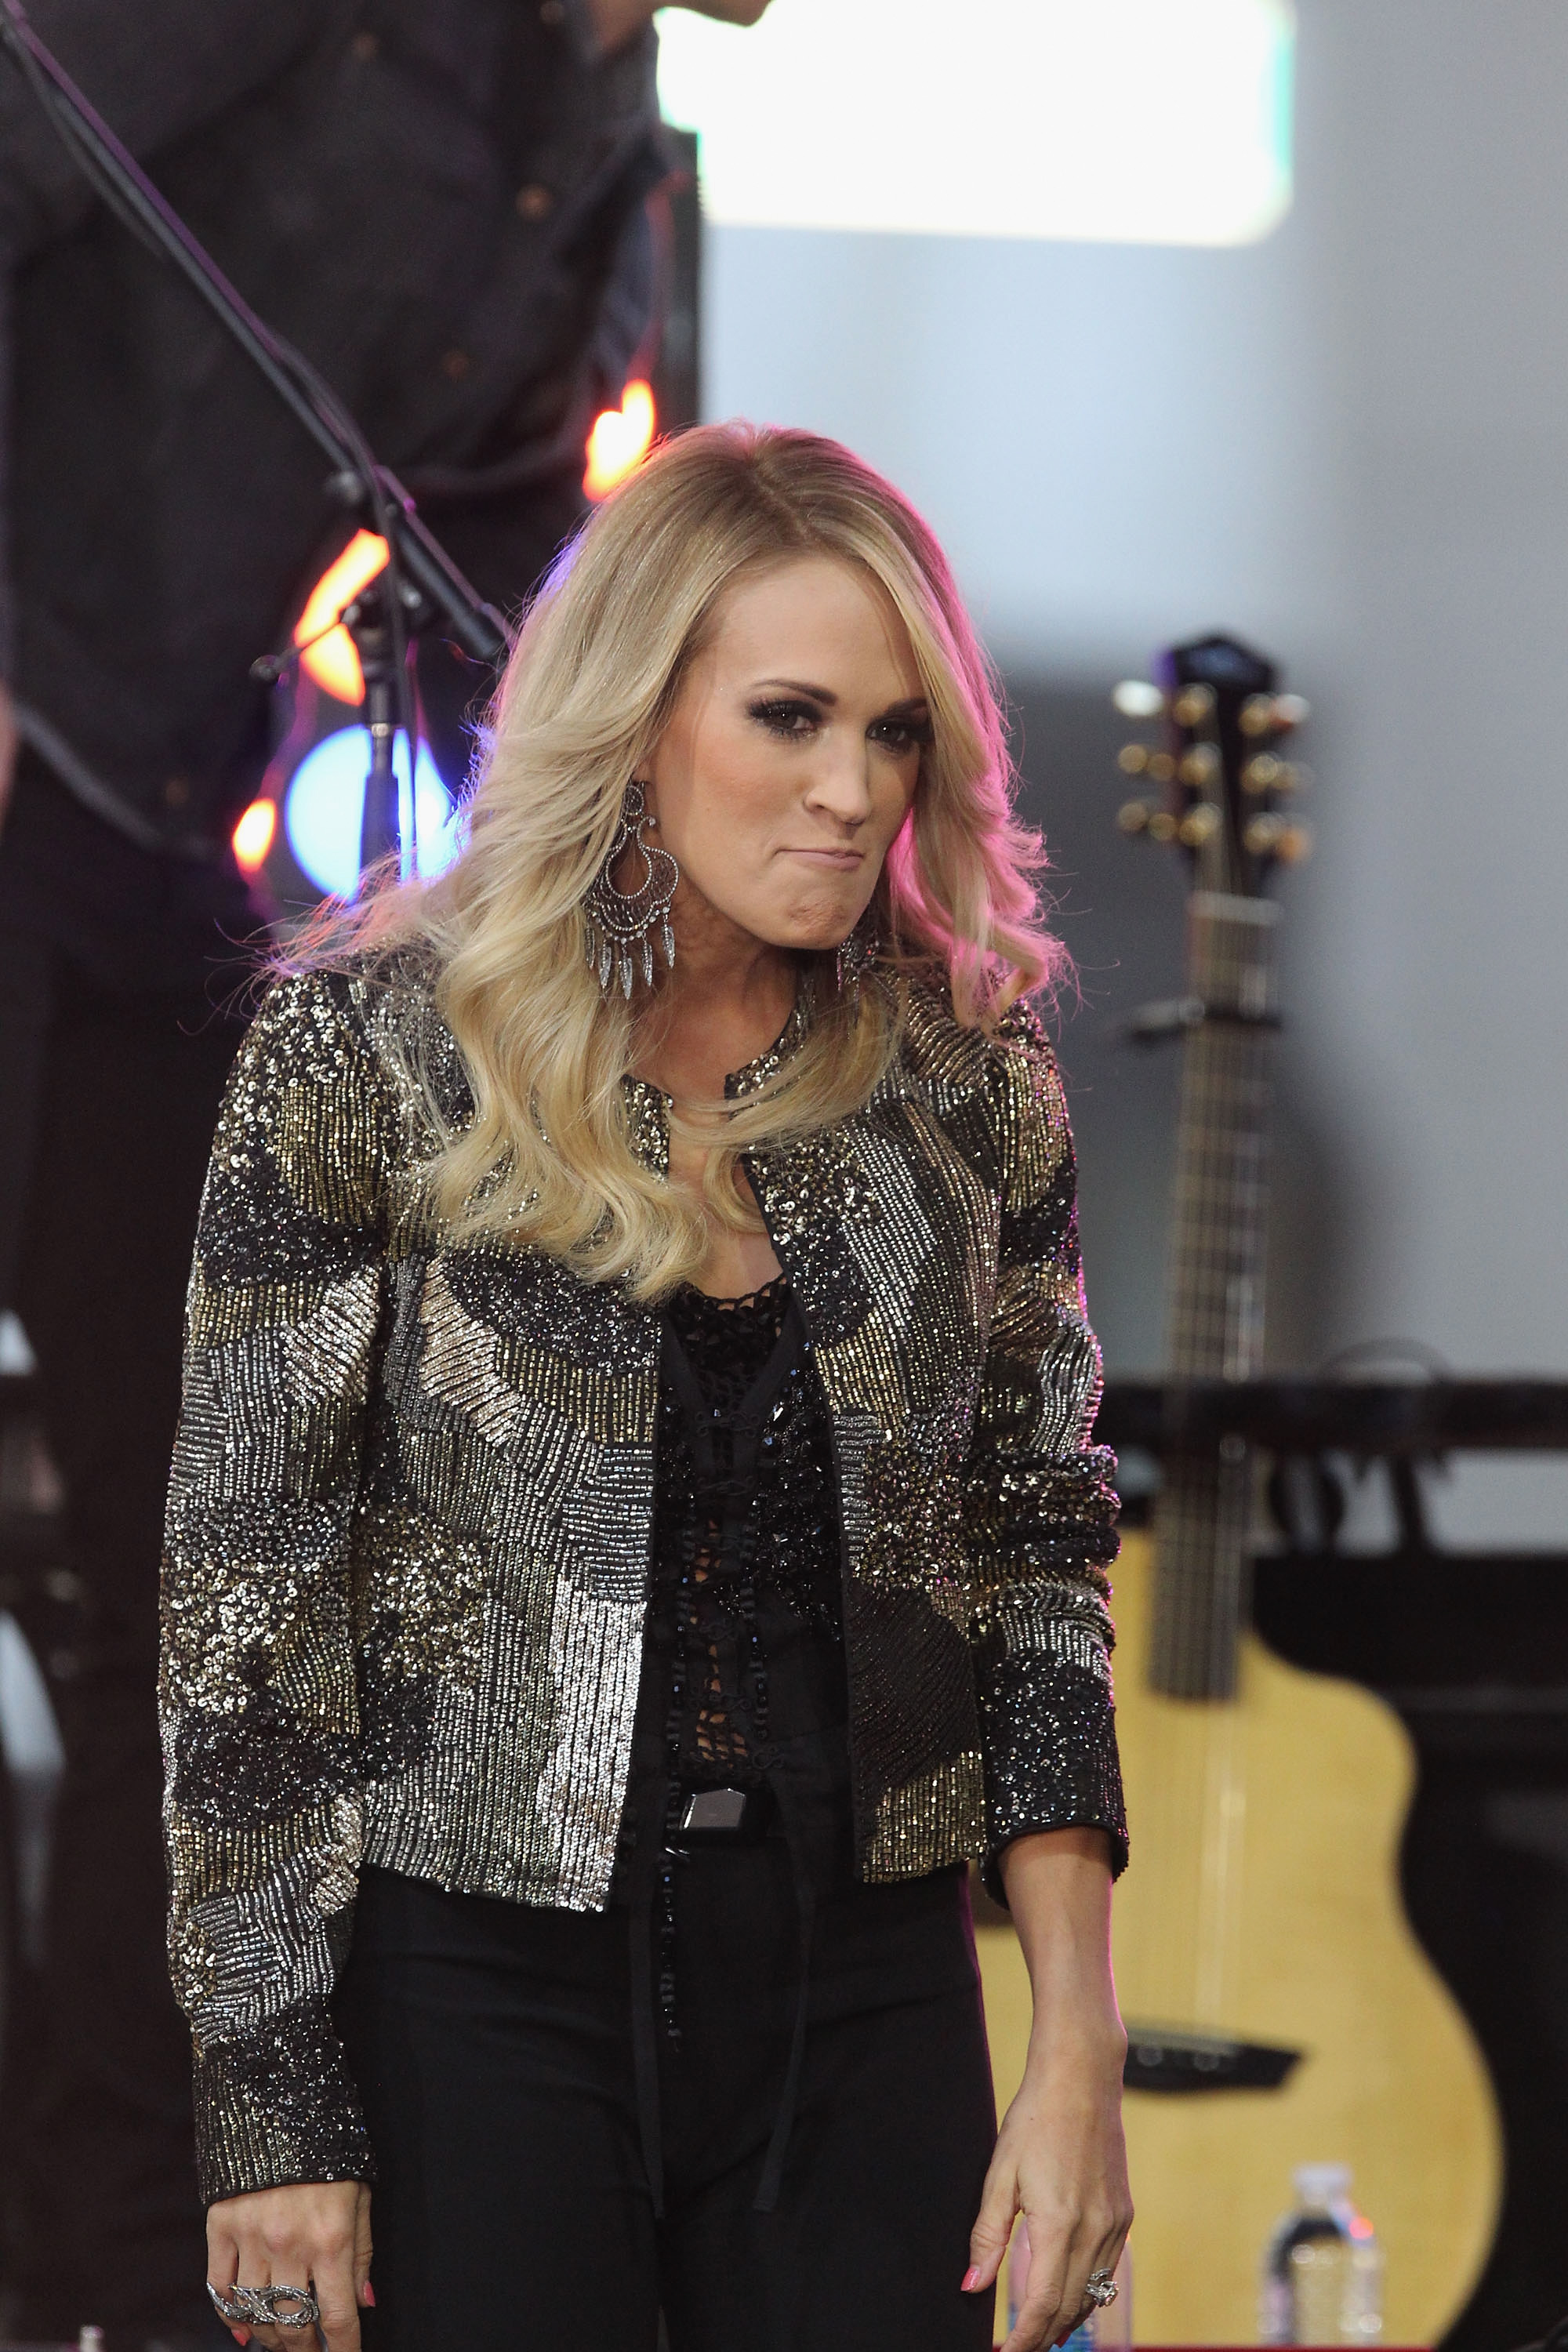 Carrie Underwood displays a quirky face while performing on NBC's "Today" Show at Rockefeller Plaza on October 23, 2015, in New York. | Source: Getty Images